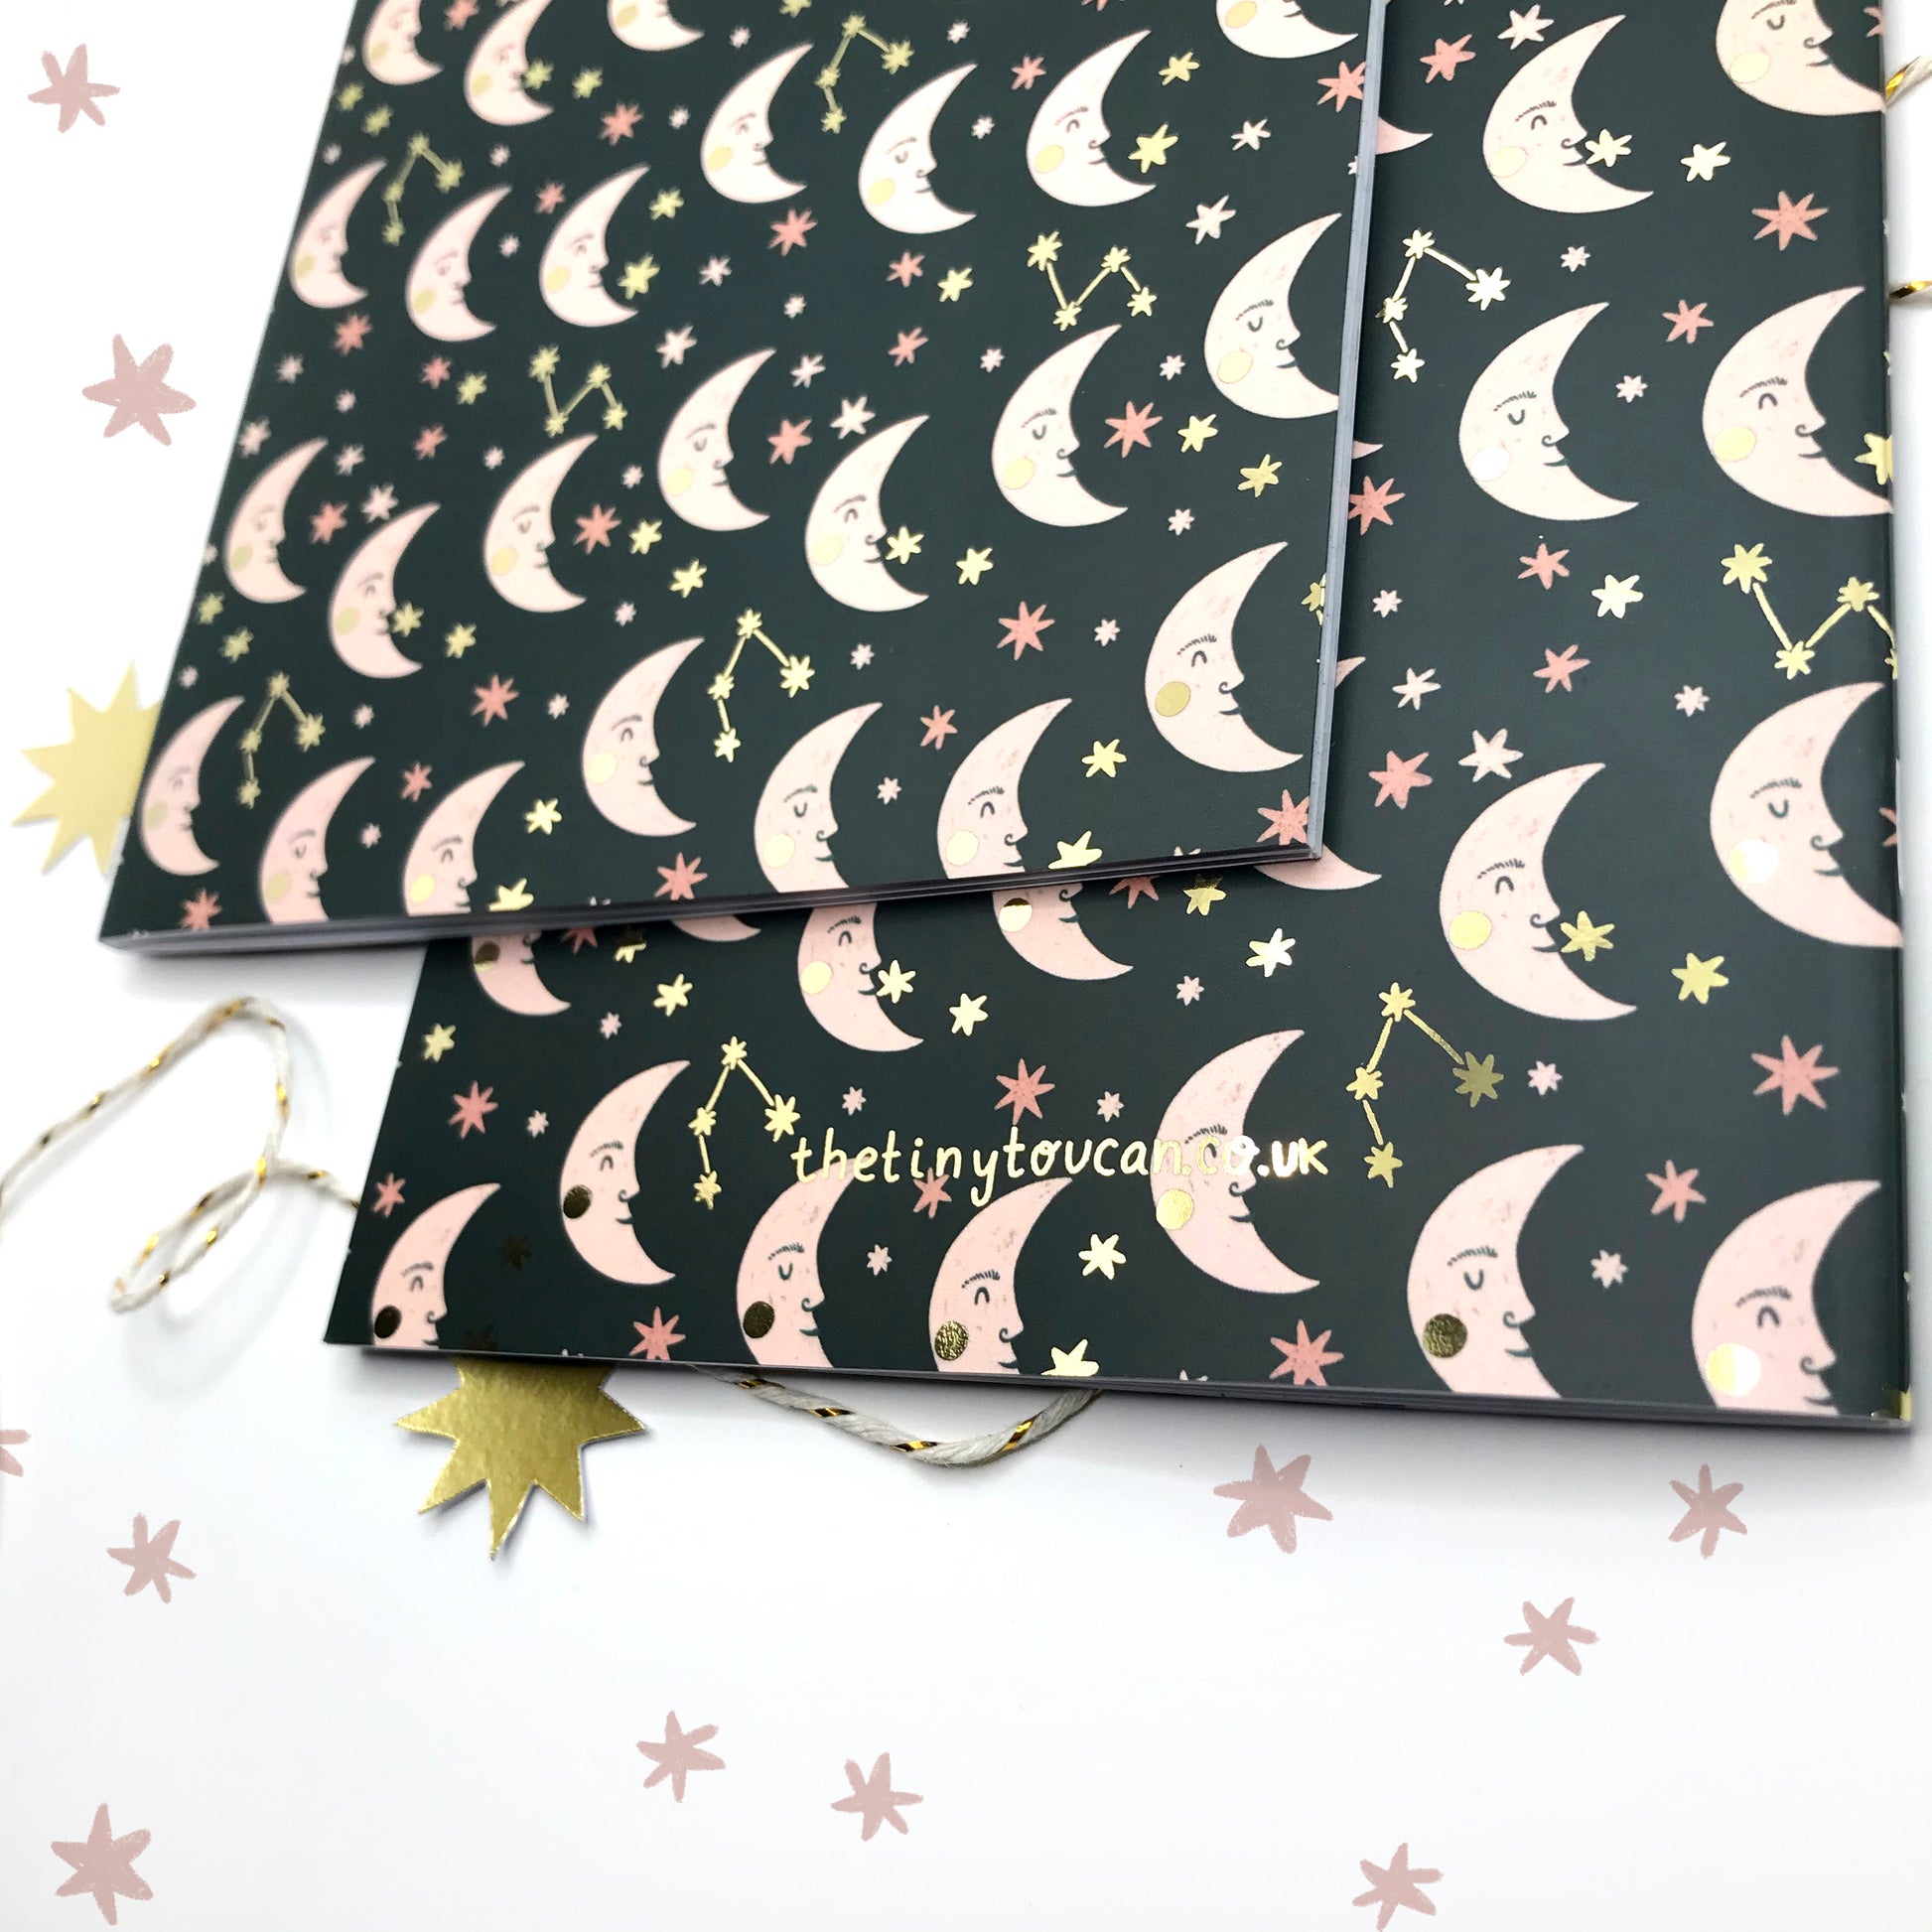 Moon Notebook- Astrology gift, stars and moon, A5 LINED NOTEBOOKS, 48 lined pages, gold foil, made in the U.K, sustainable sourced paper,